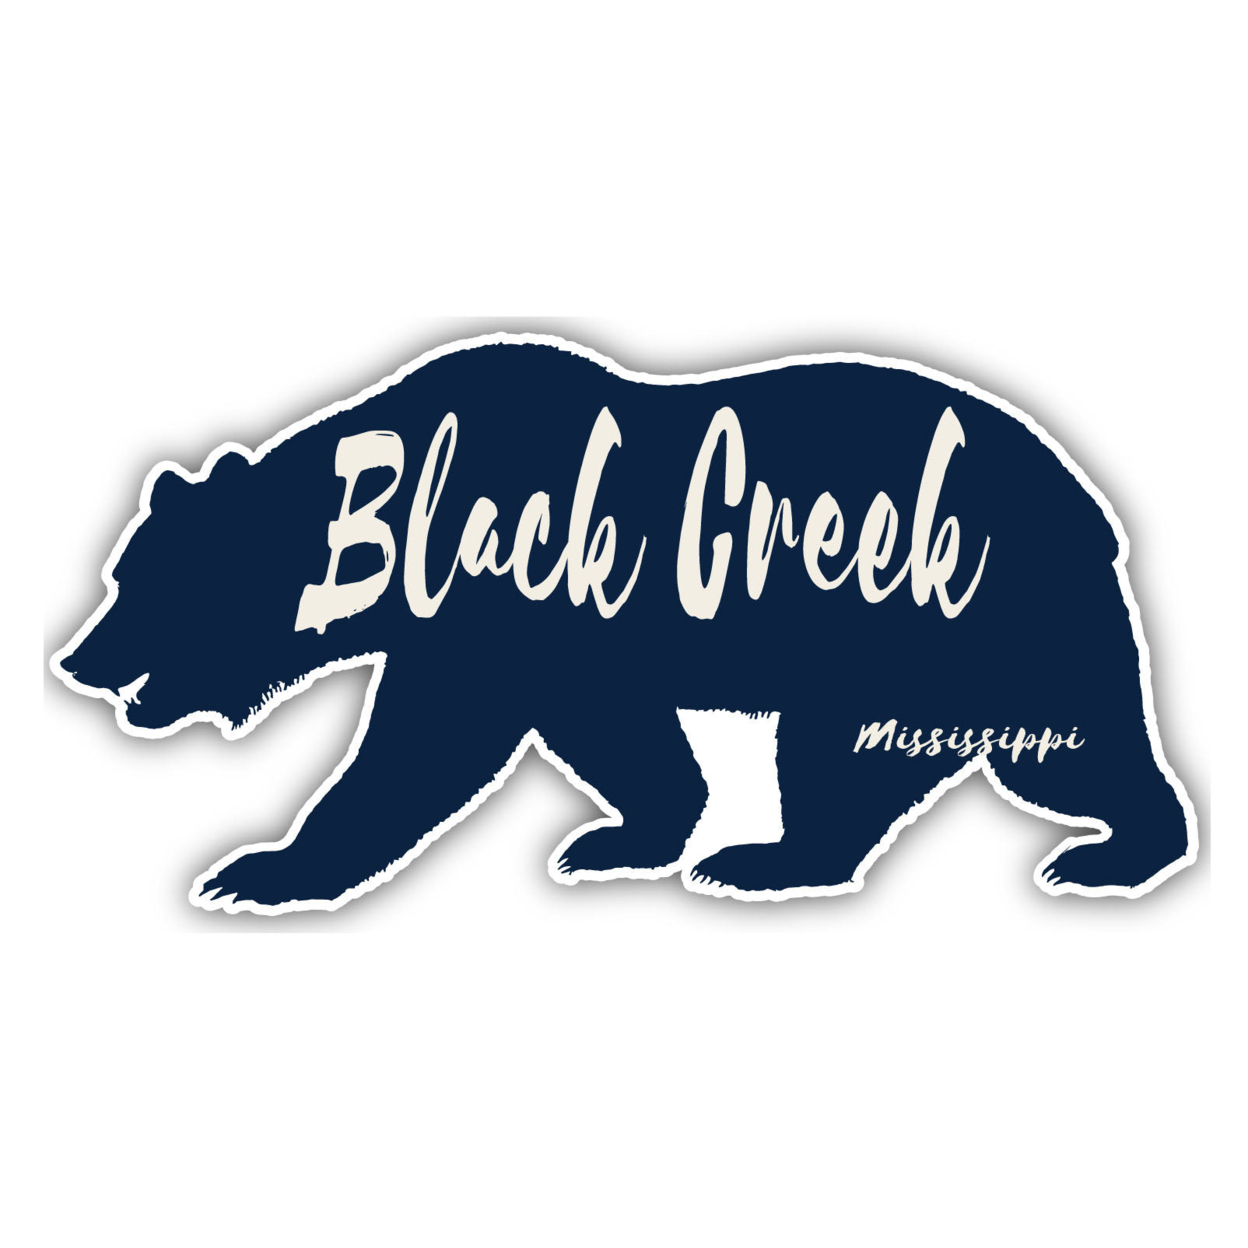 Black Creek Mississippi Souvenir Decorative Stickers (Choose Theme And Size) - 4-Pack, 6-Inch, Bear